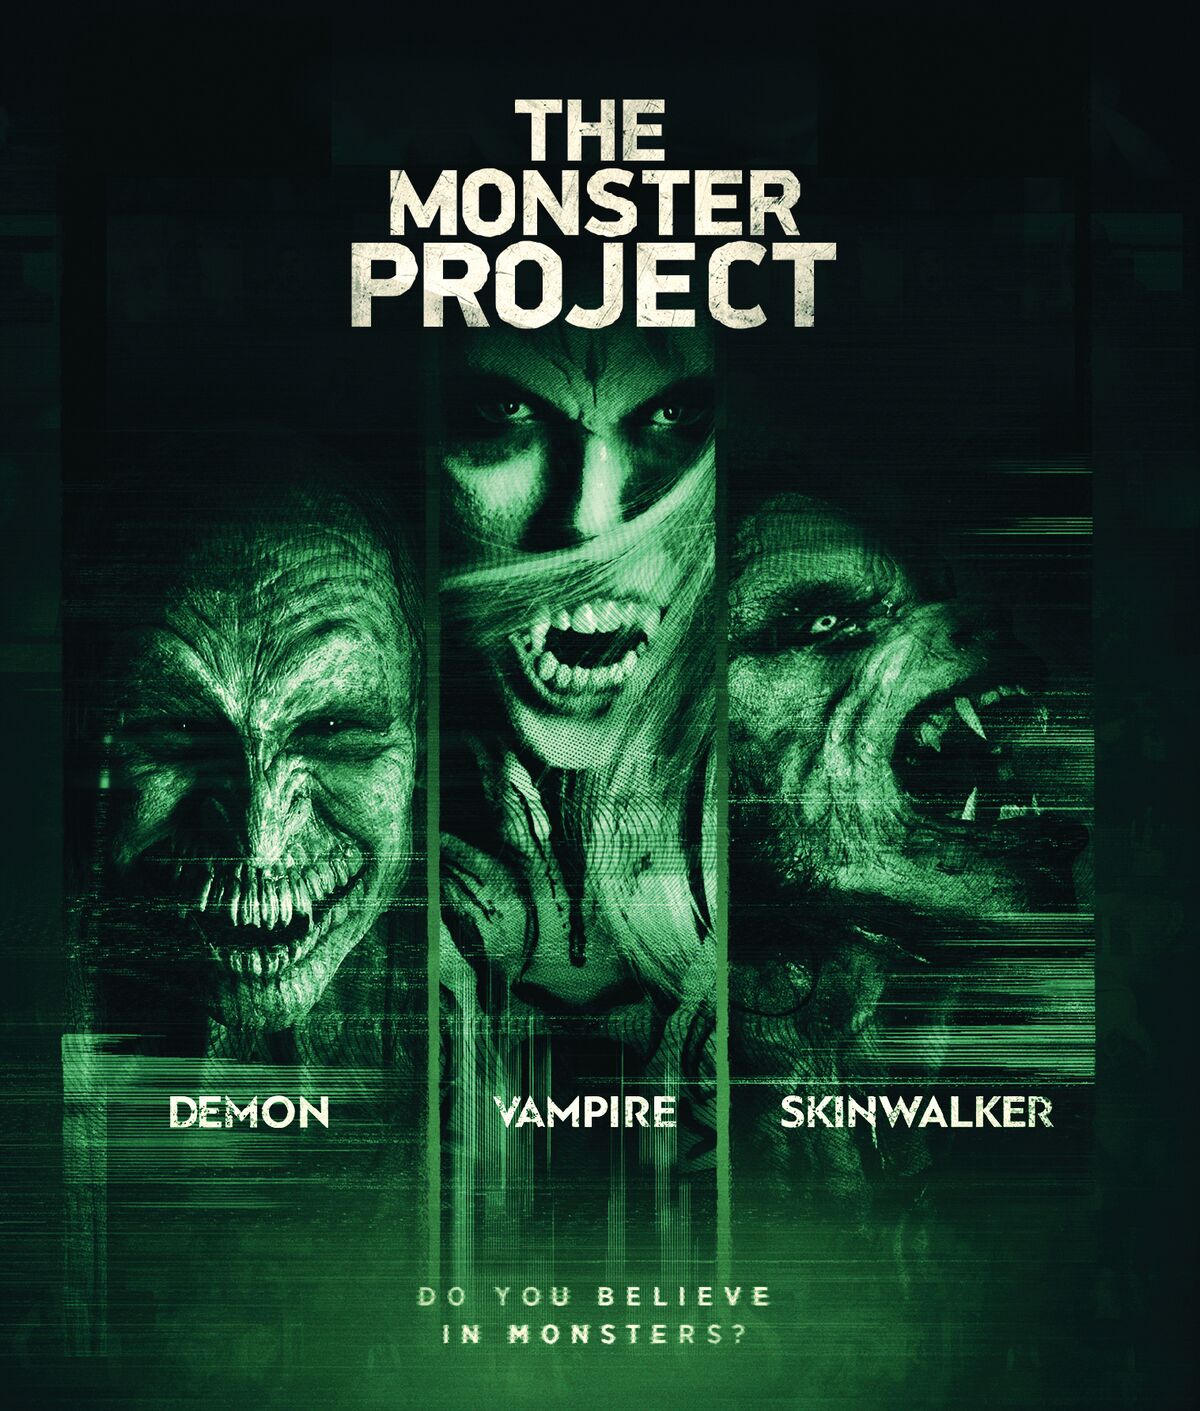 The Monster Project / #screamers Blu-Ray Blu-Ray